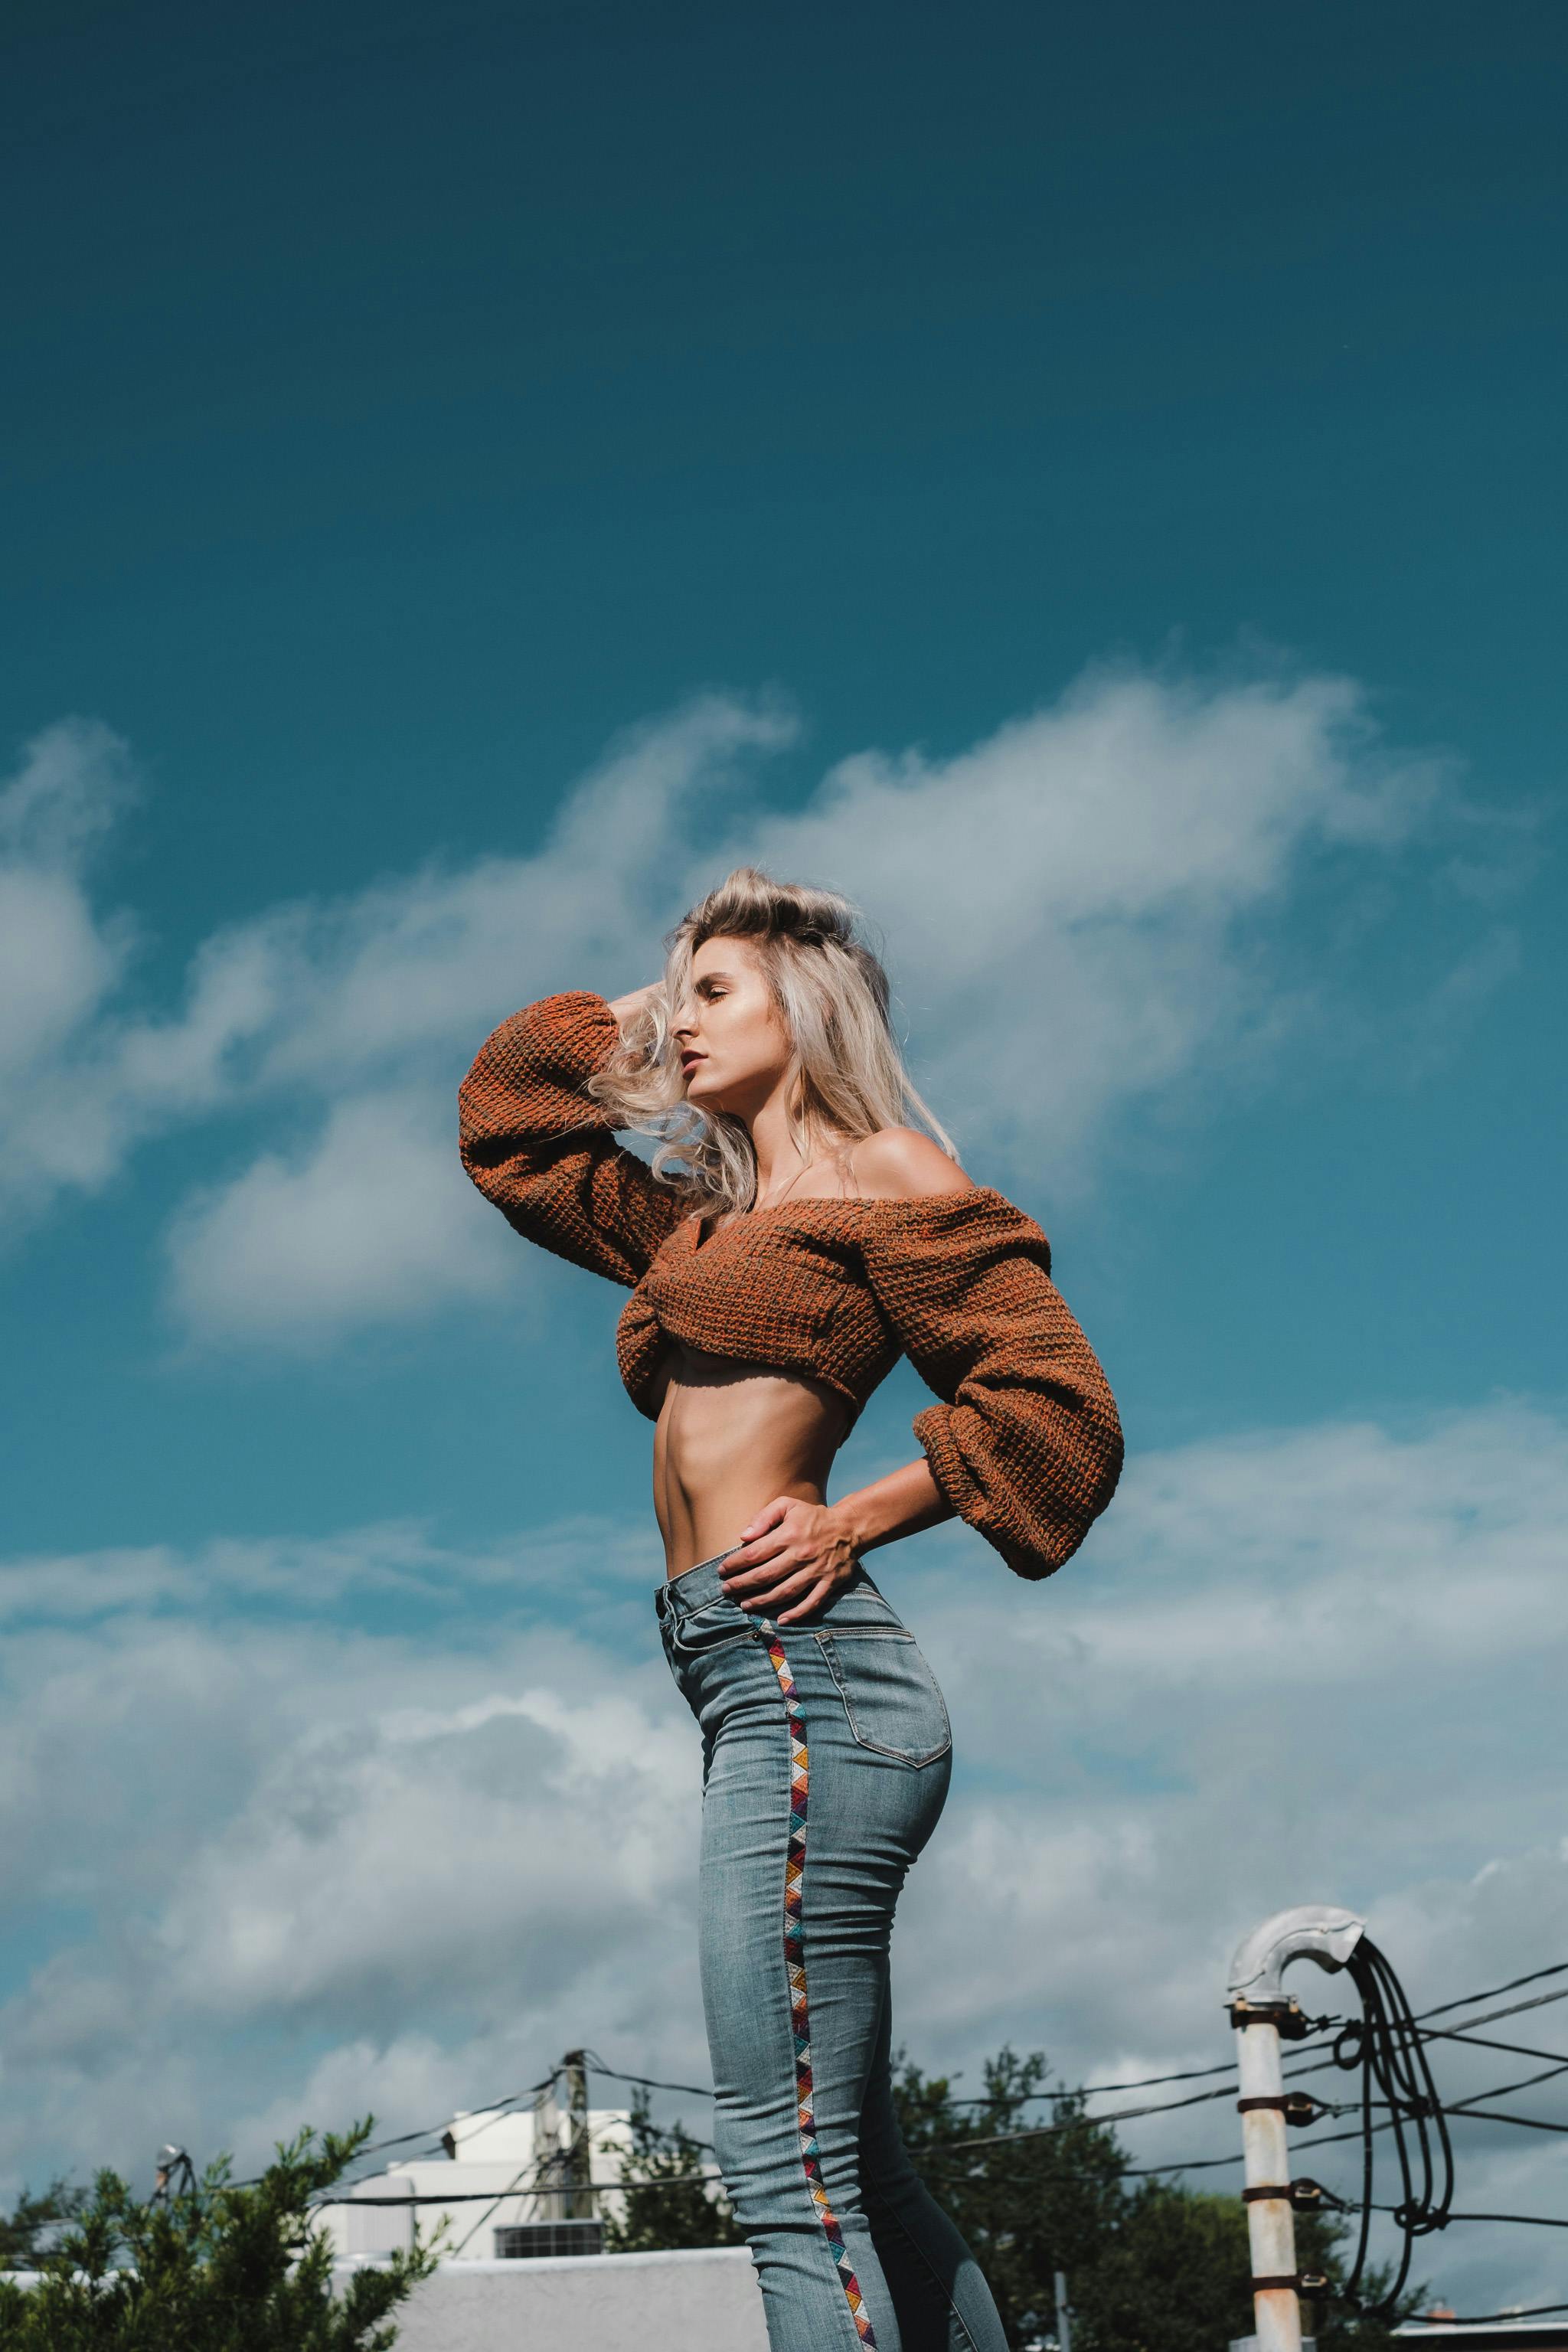 A Woman in Crop Top and Mini Skirt with Black Boots · Free Stock Photo